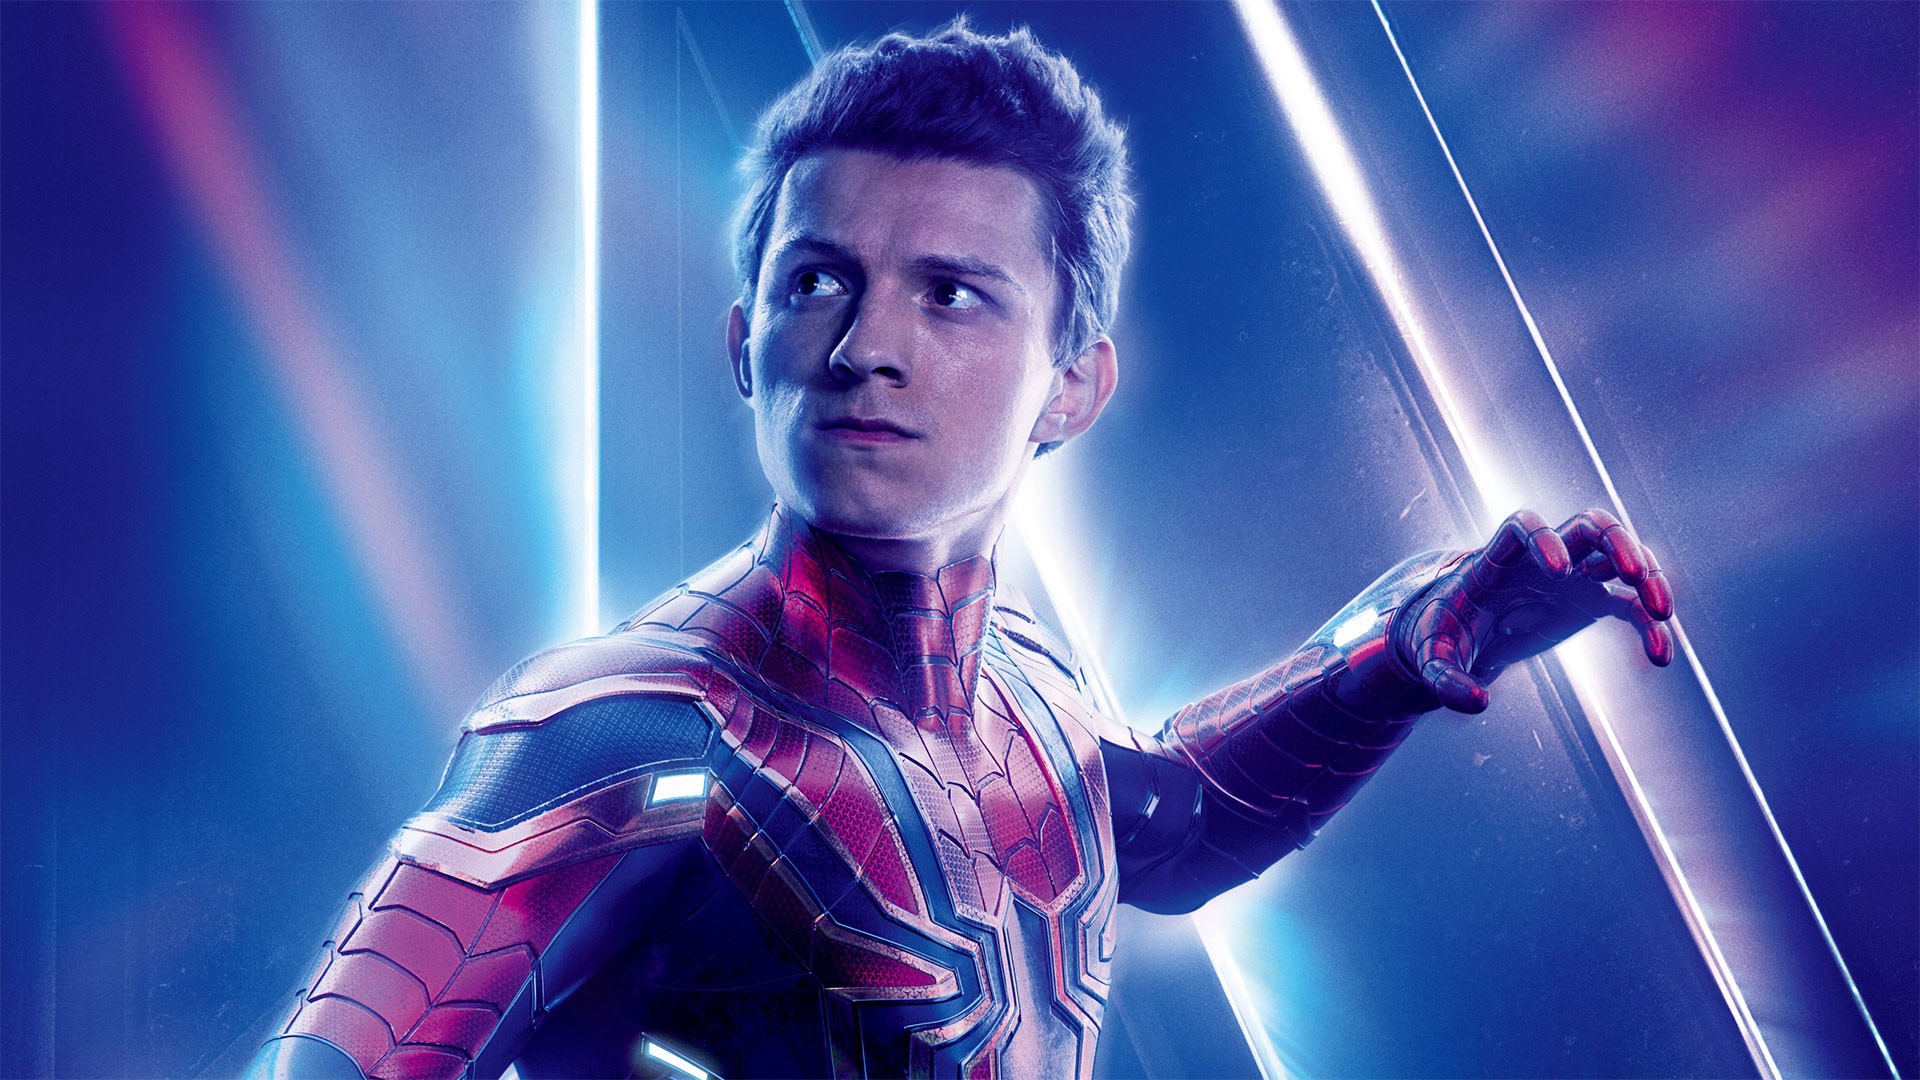 Tom Holland Spider-man Avengers Endgame Wallpaper HD with high-resolution 1920x1080 pixel. You can use this poster wallpaper for your Desktop Computers, Mac Screensavers, Windows Backgrounds, iPhone Wallpapers, Tablet or Android Lock screen and another Mobile device